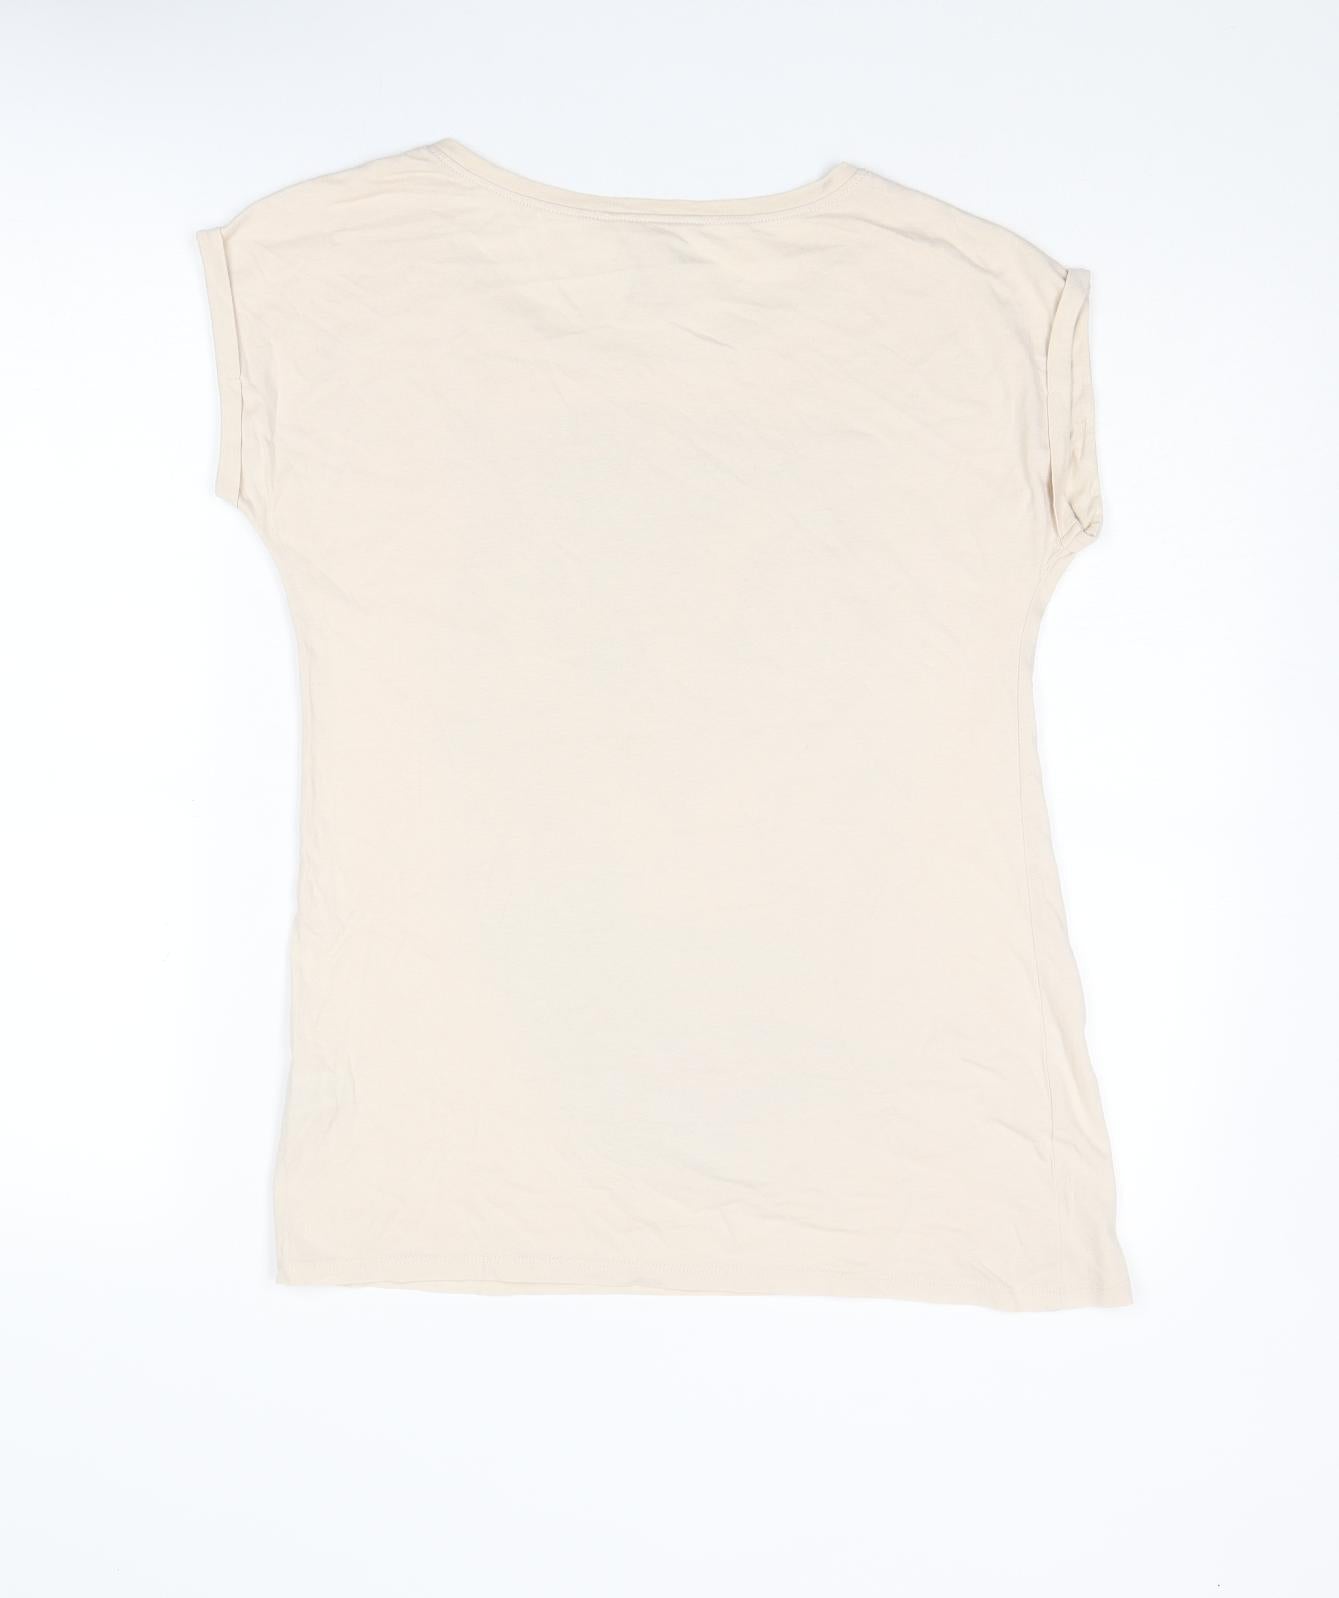 Dunnes Stores Womens Beige Cotton Basic T-Shirt Size 12 Boat Neck - Tiger